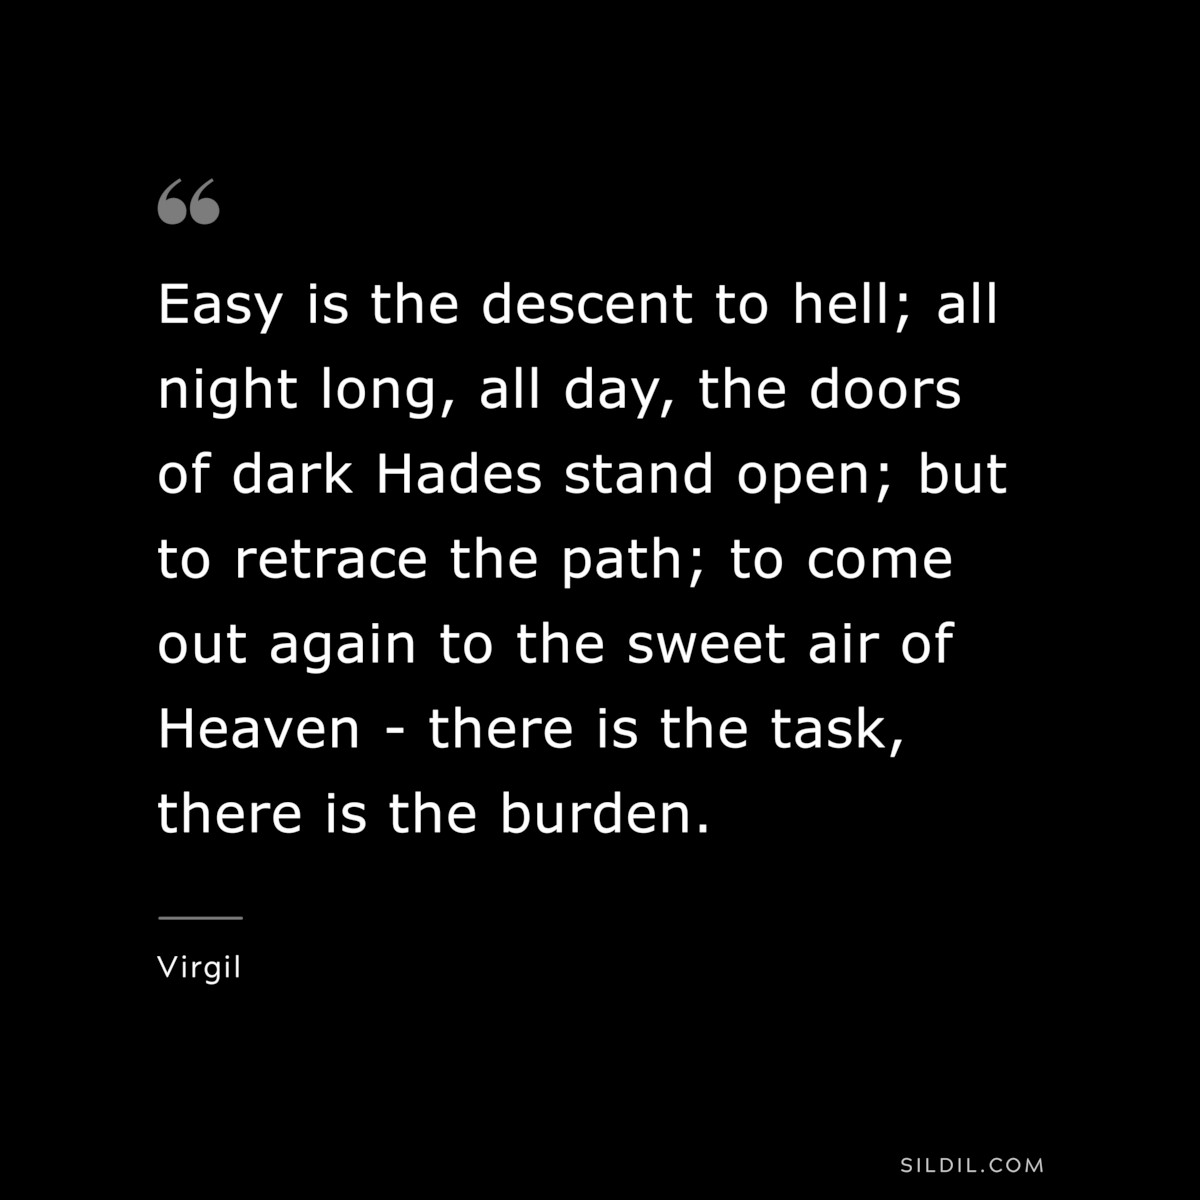 Easy is the descent to hell; all night long, all day, the doors of dark Hades stand open; but to retrace the path; to come out again to the sweet air of Heaven - there is the task, there is the burden. ― Virgil